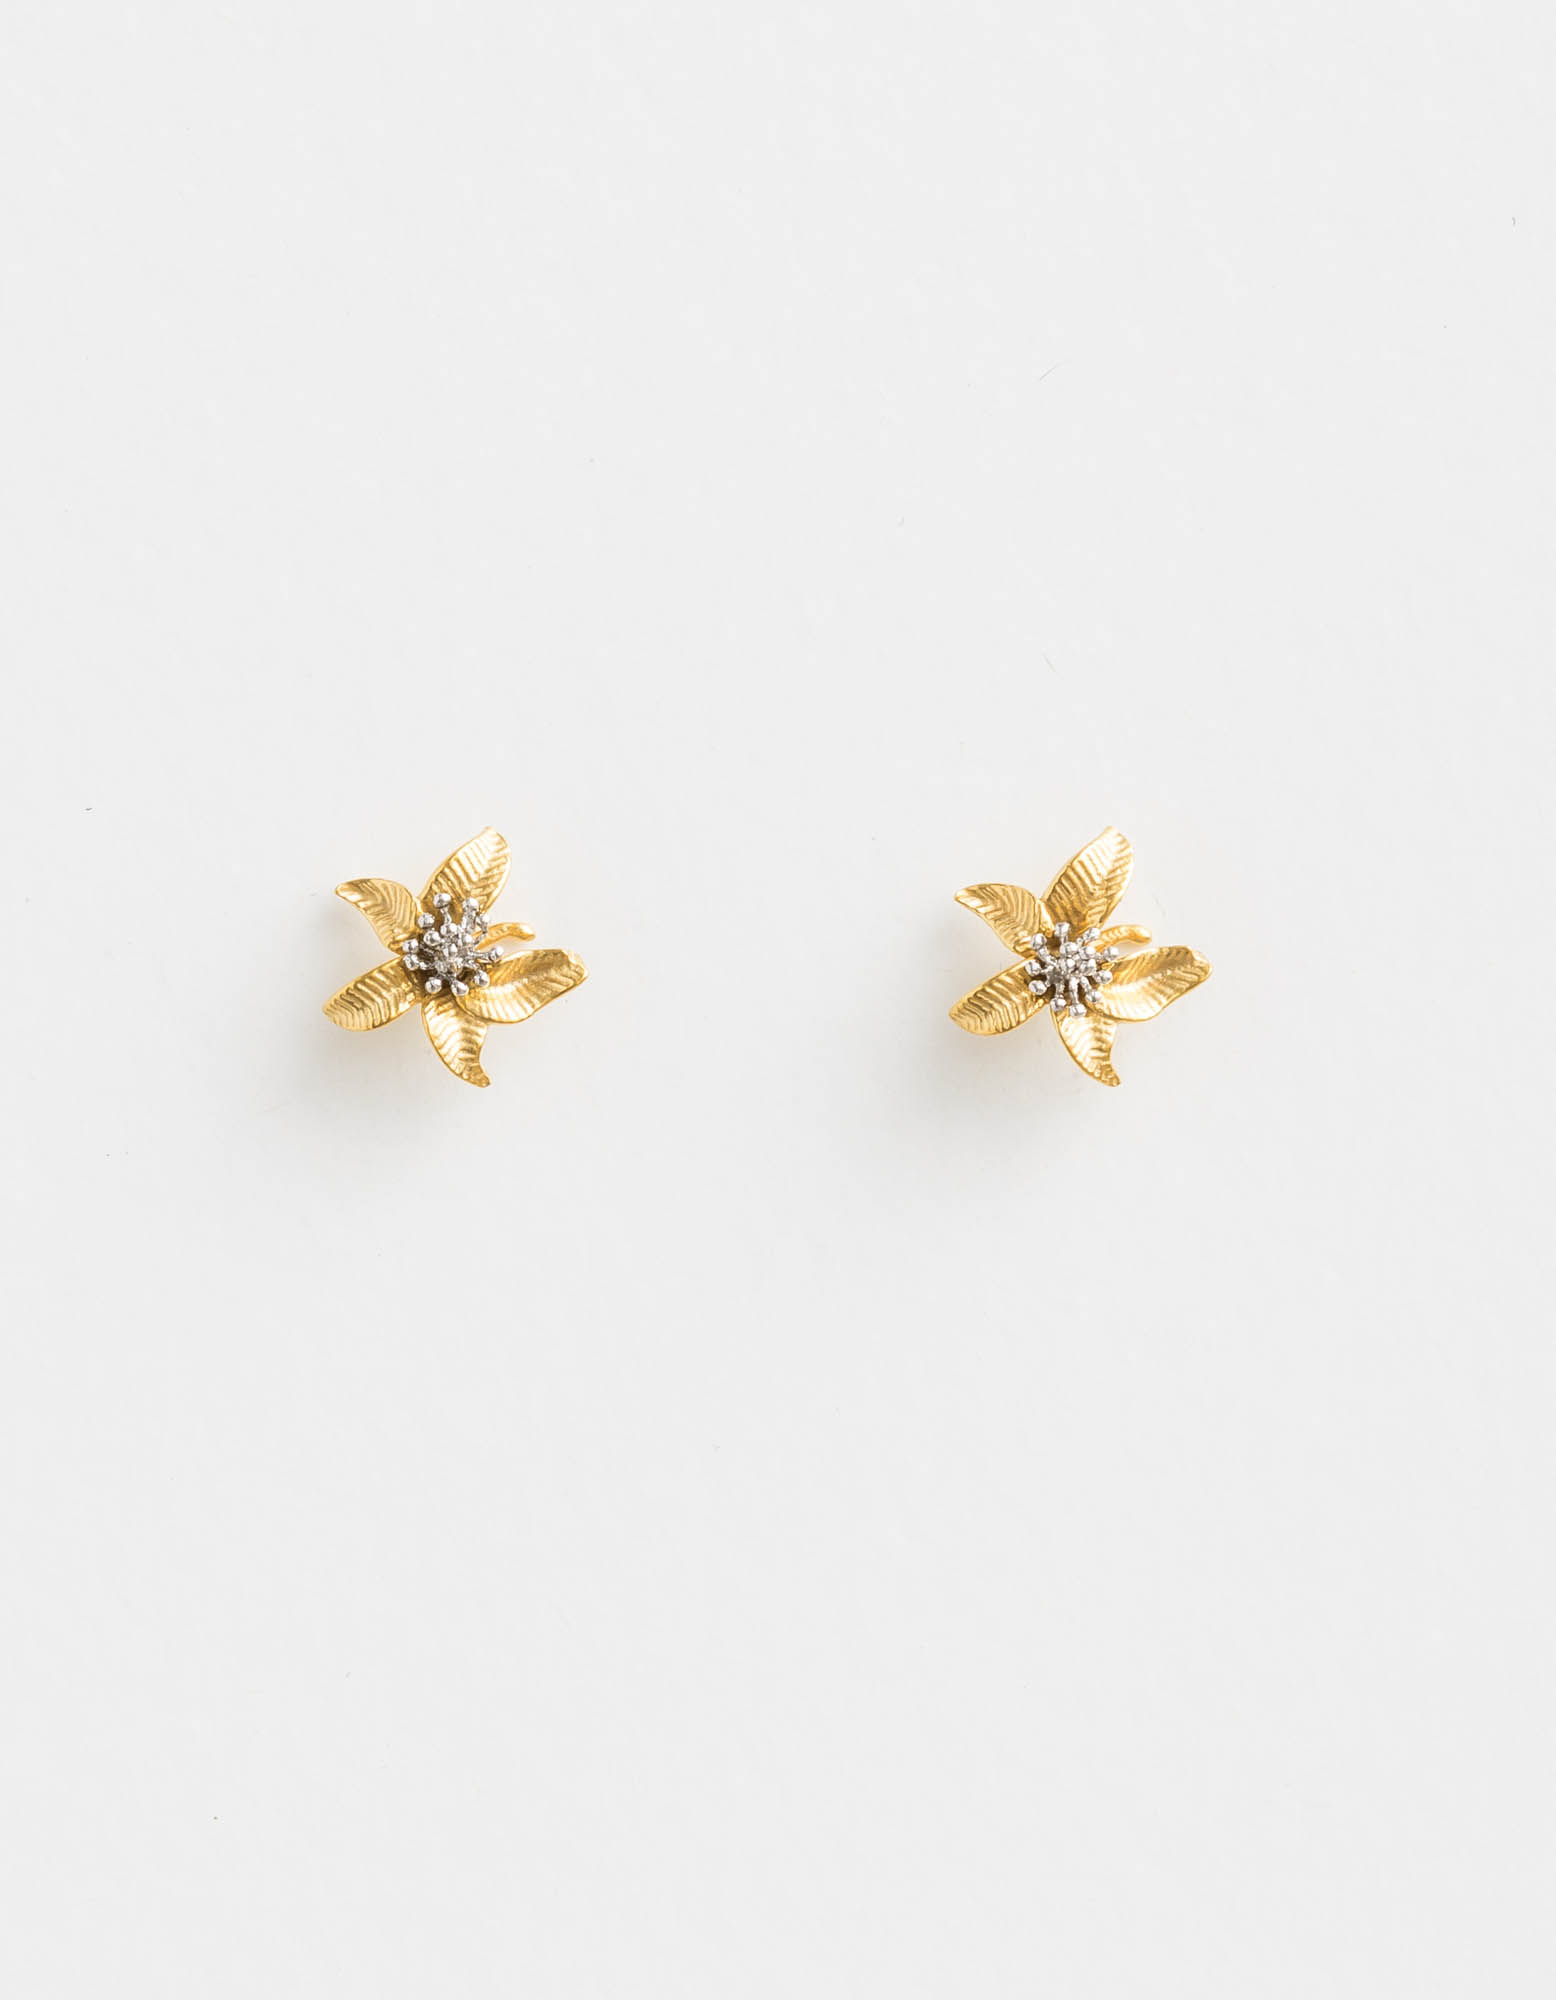 Stella Gemma | Earrings | Tiger Lily Gold | Expressions